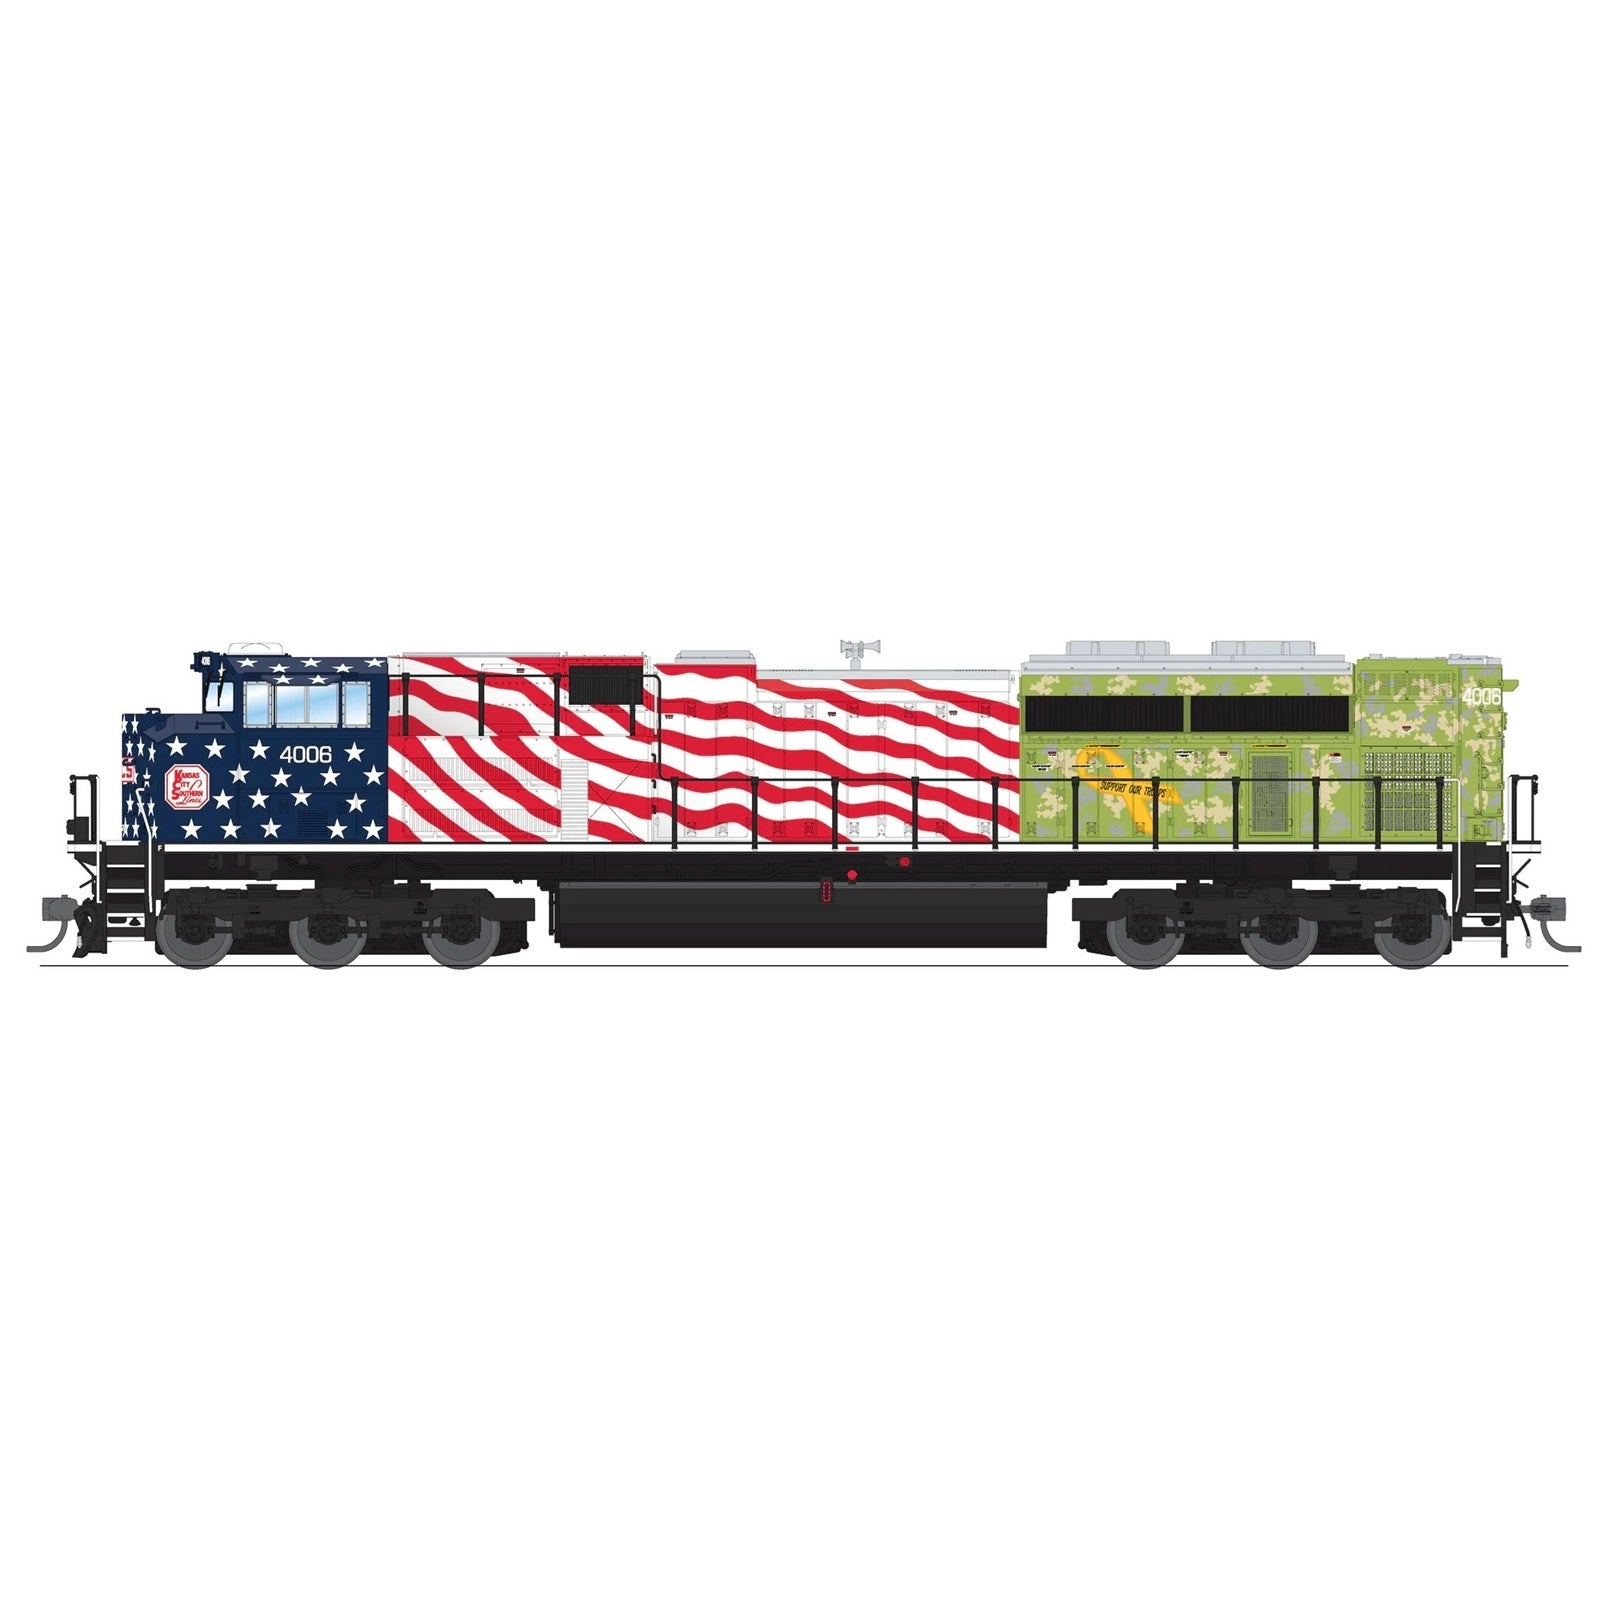 Broadway Limited EMD SD70ACe KCS #4006 “Support Our Troops” Paragon 4 Sound/DC/DCC w/Smoke, HO Scale - Pre - Order - Micro - Mark Locomotives